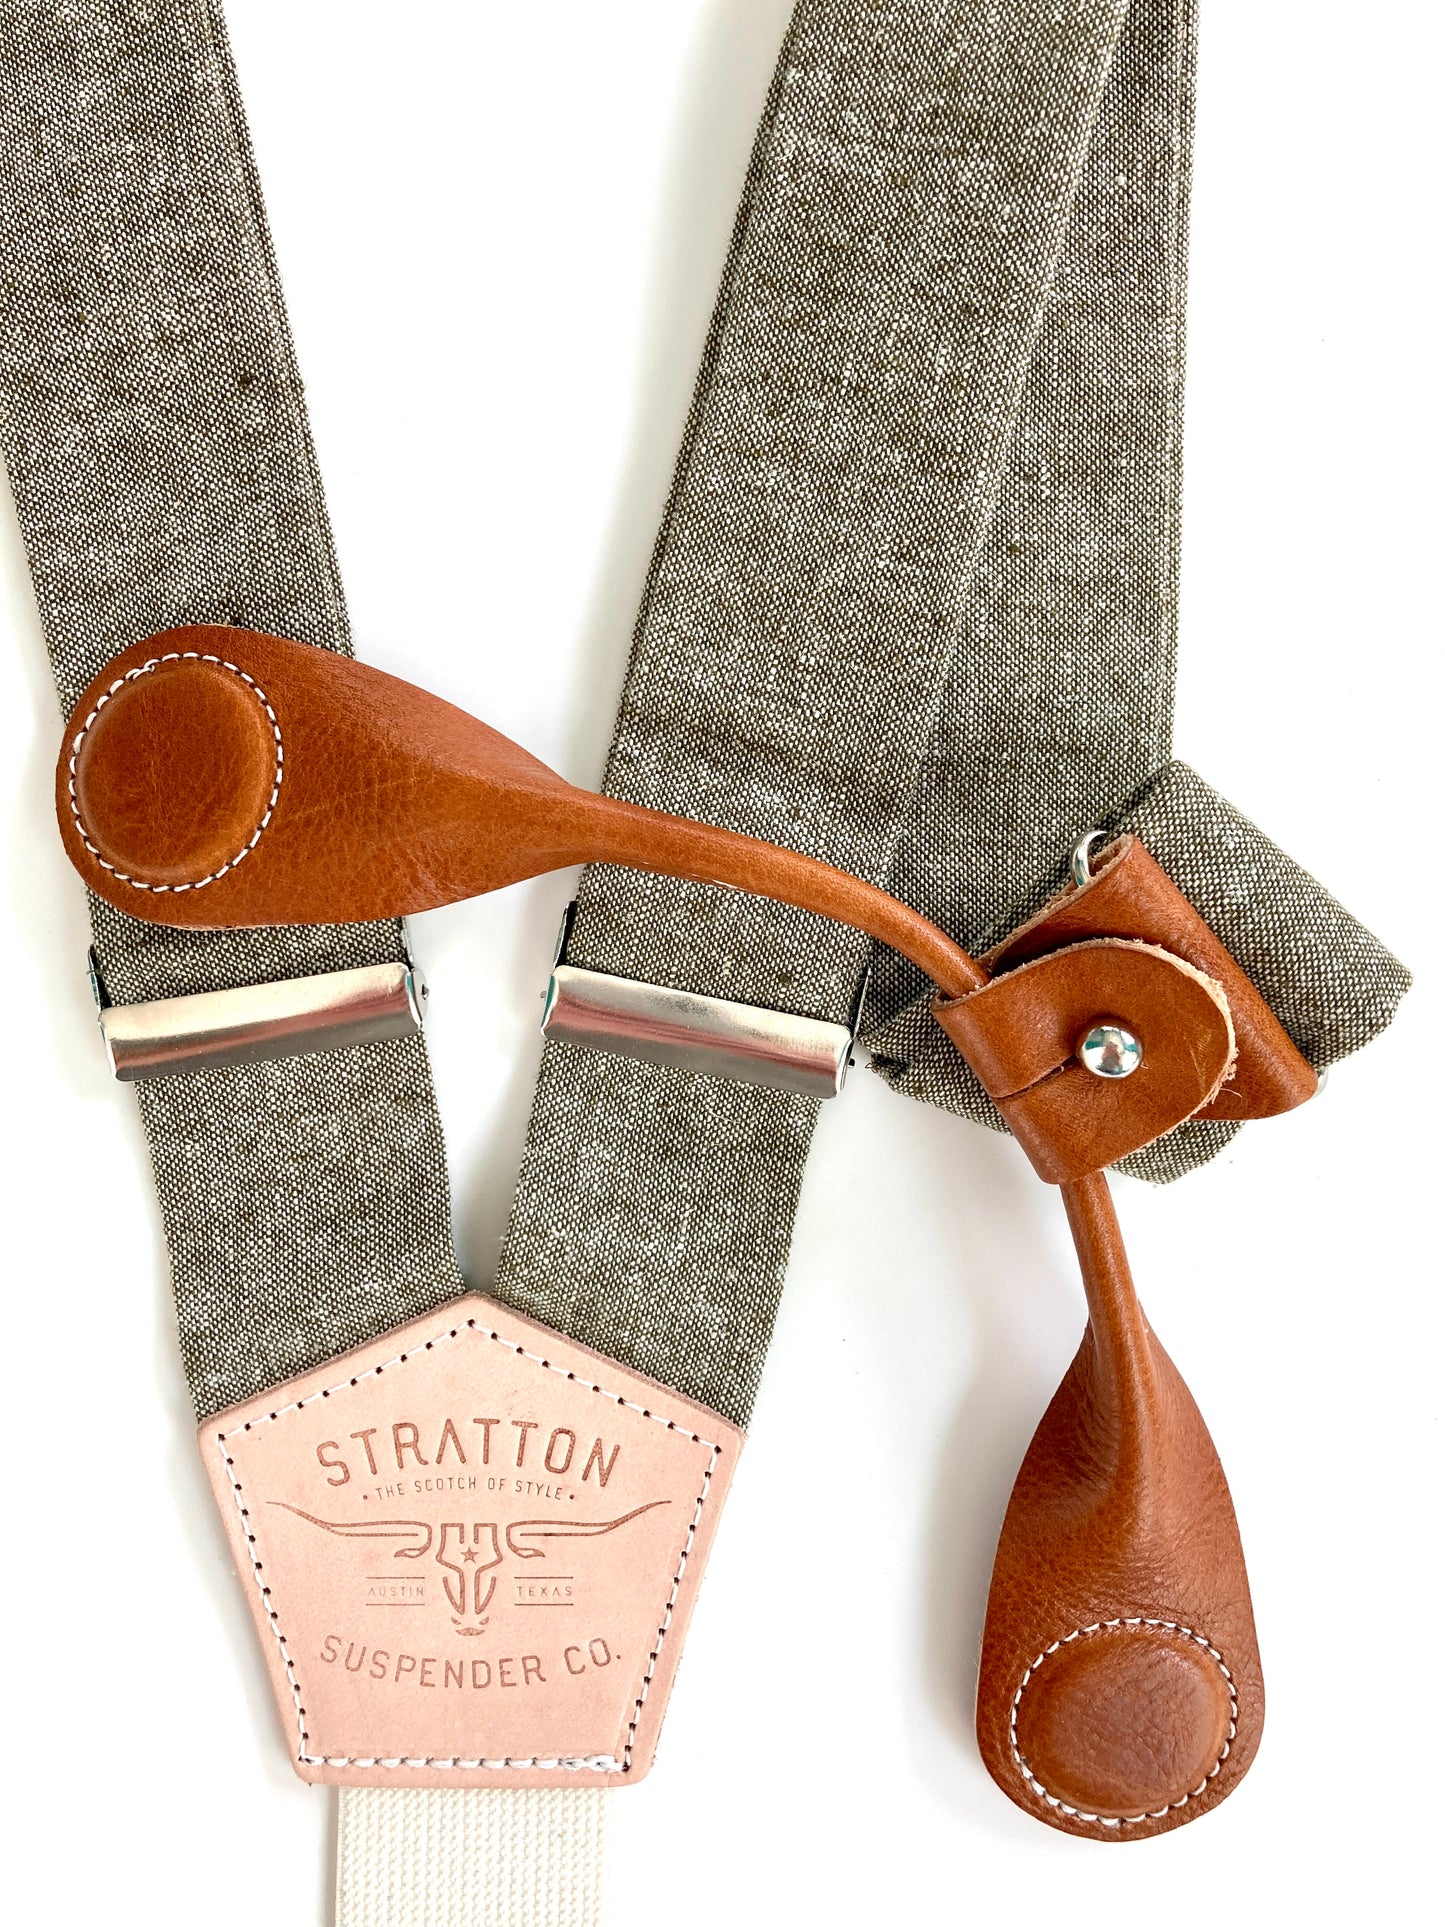 Stratton Suspender Co. features the Olive Green linen suspenders on veg tan shoulder leather with cream colored elastic back strap for the Fall 2022 suspenders collection Magnetic Stratton Suspender clasps in Tan Pontedero Italian leather hand-picked by Stratton Suspender Co.